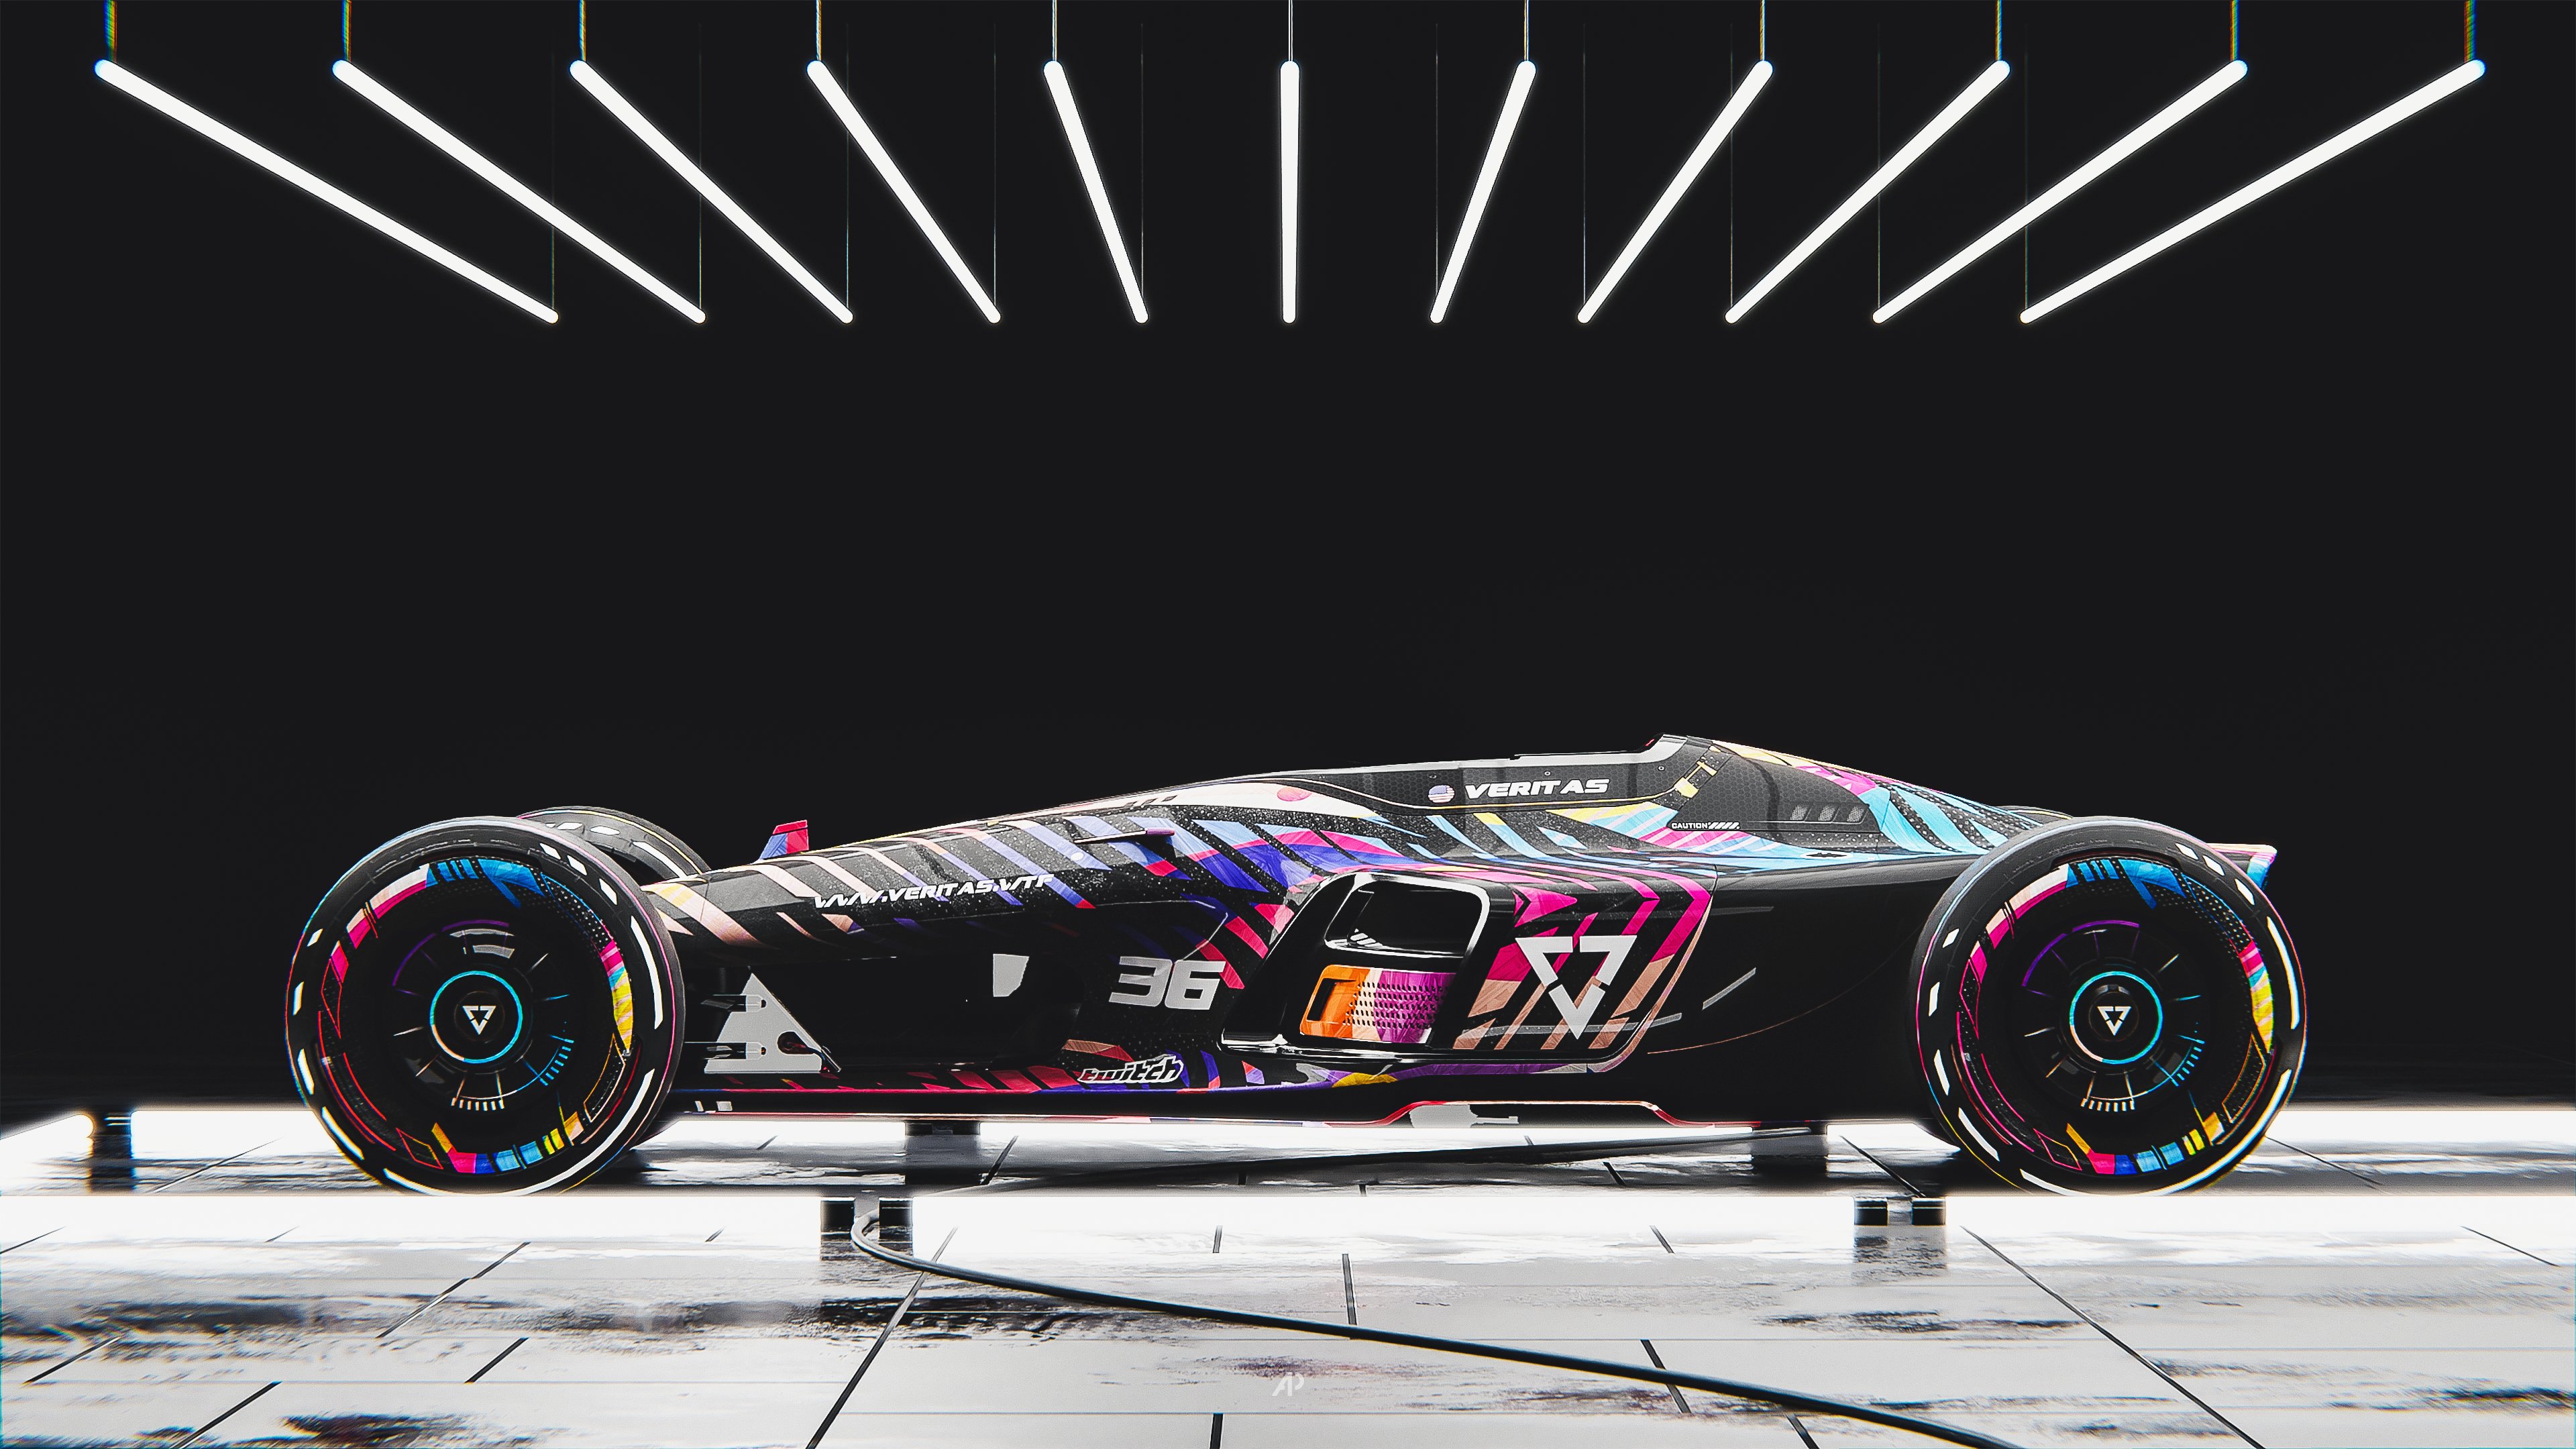 Veritas 2022 skin which won the Skin of The Year category at the TrackMania Awards 2022